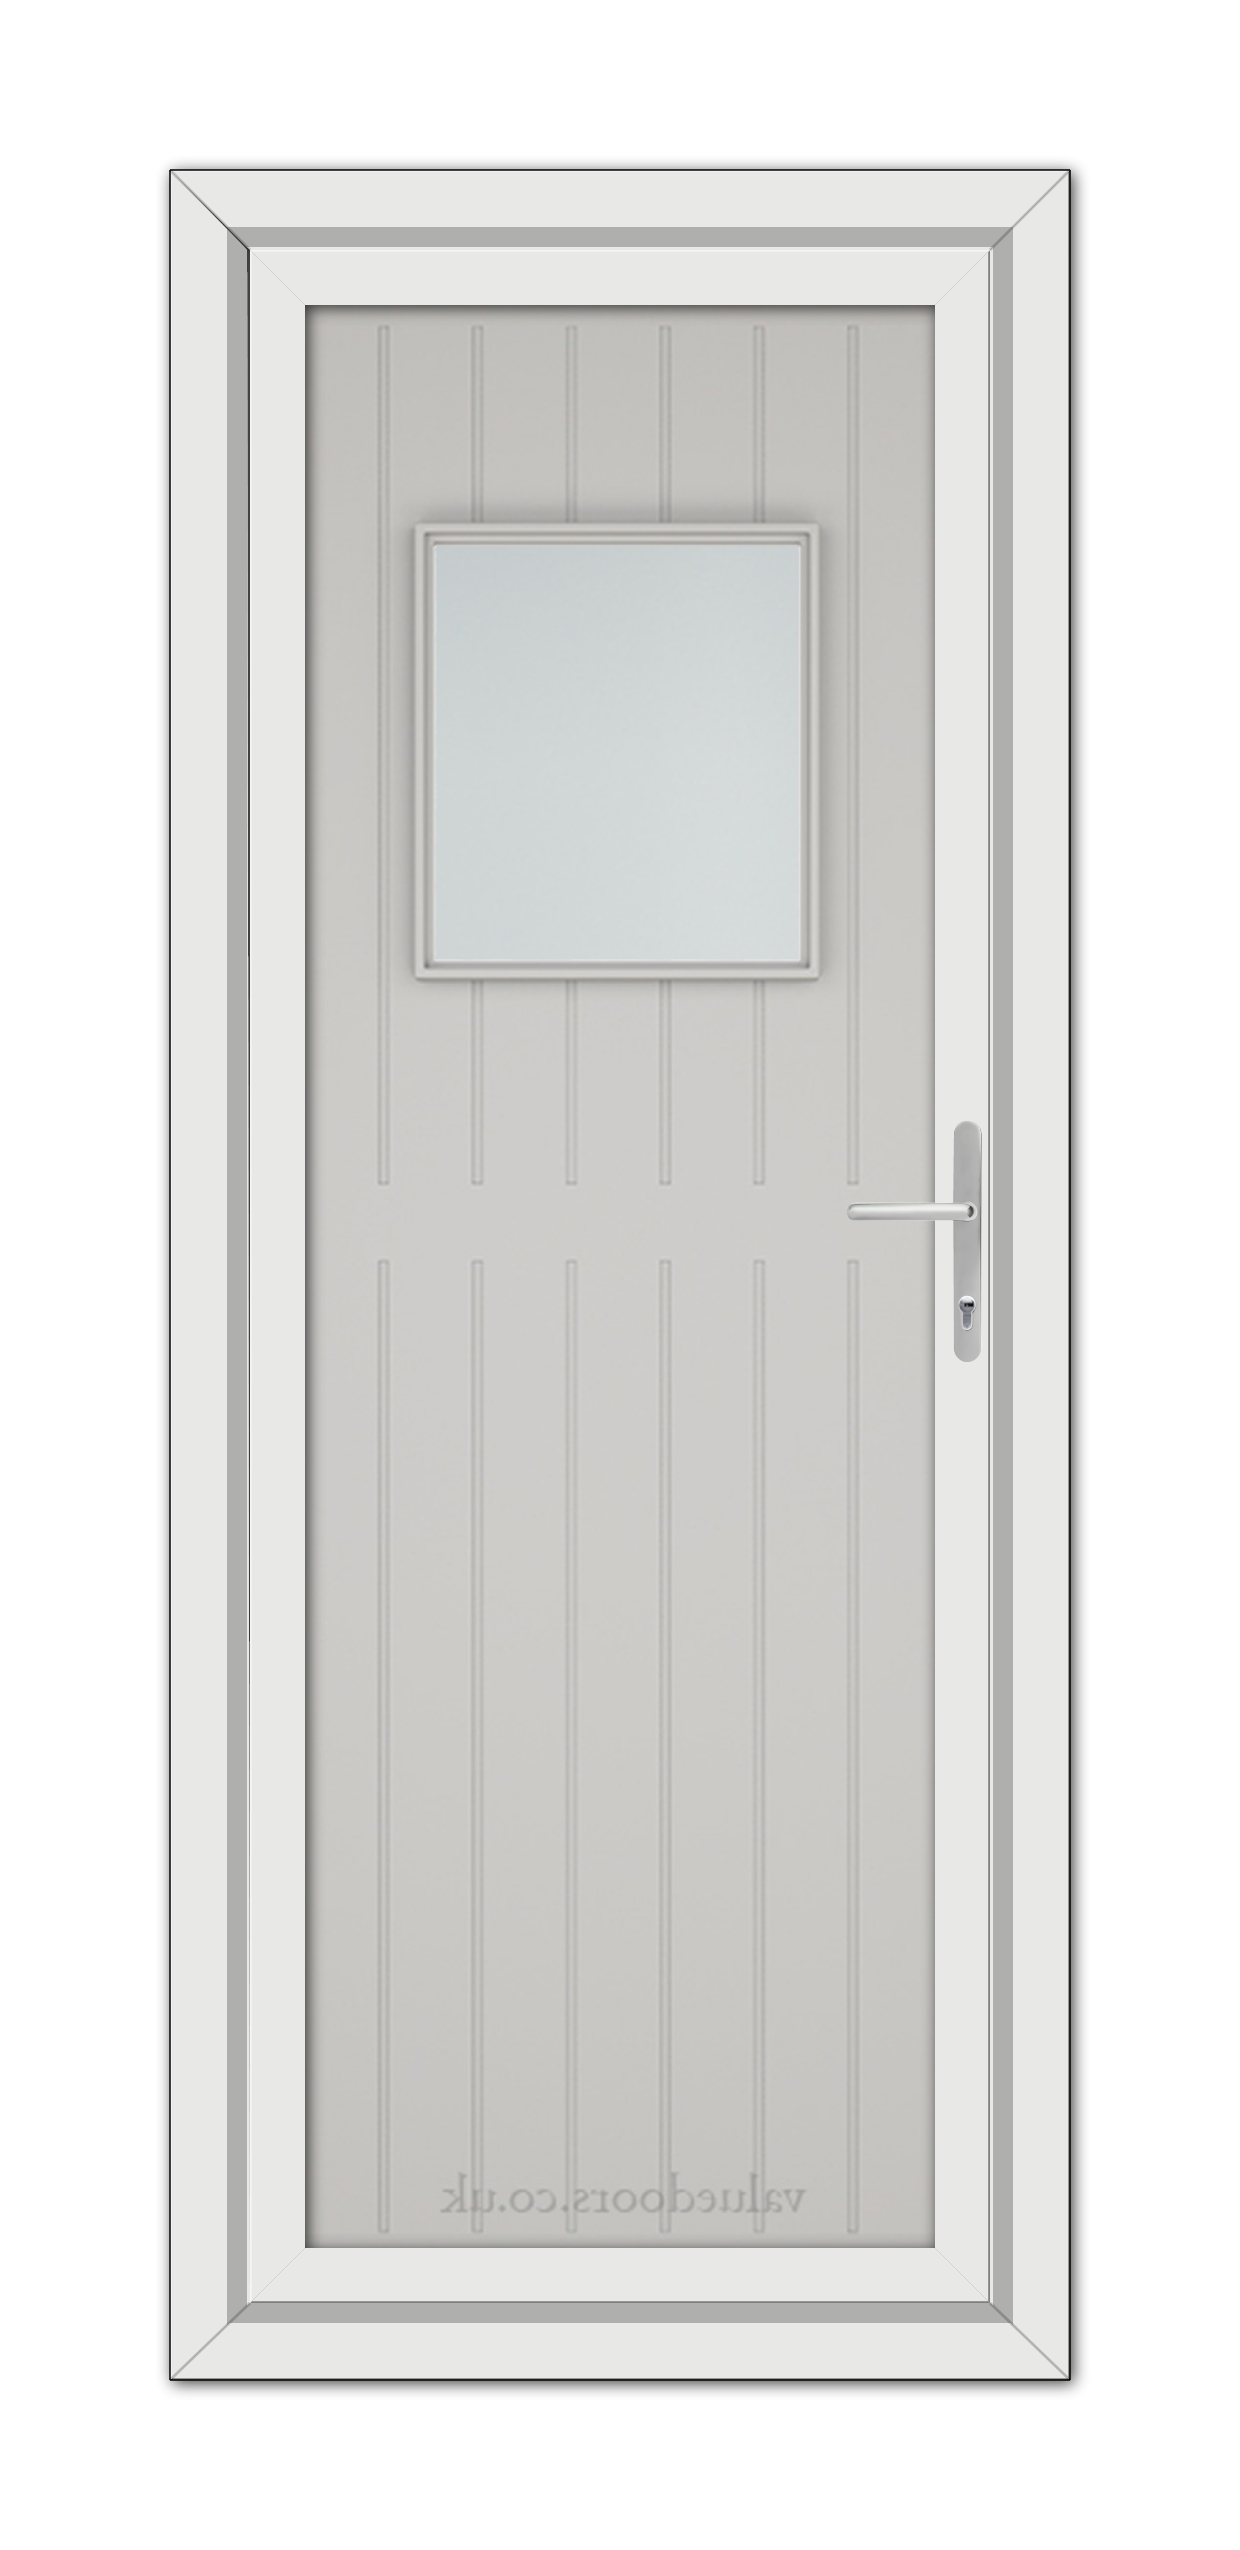 A Silver Grey Chatsworth uPVC door with a square sign.